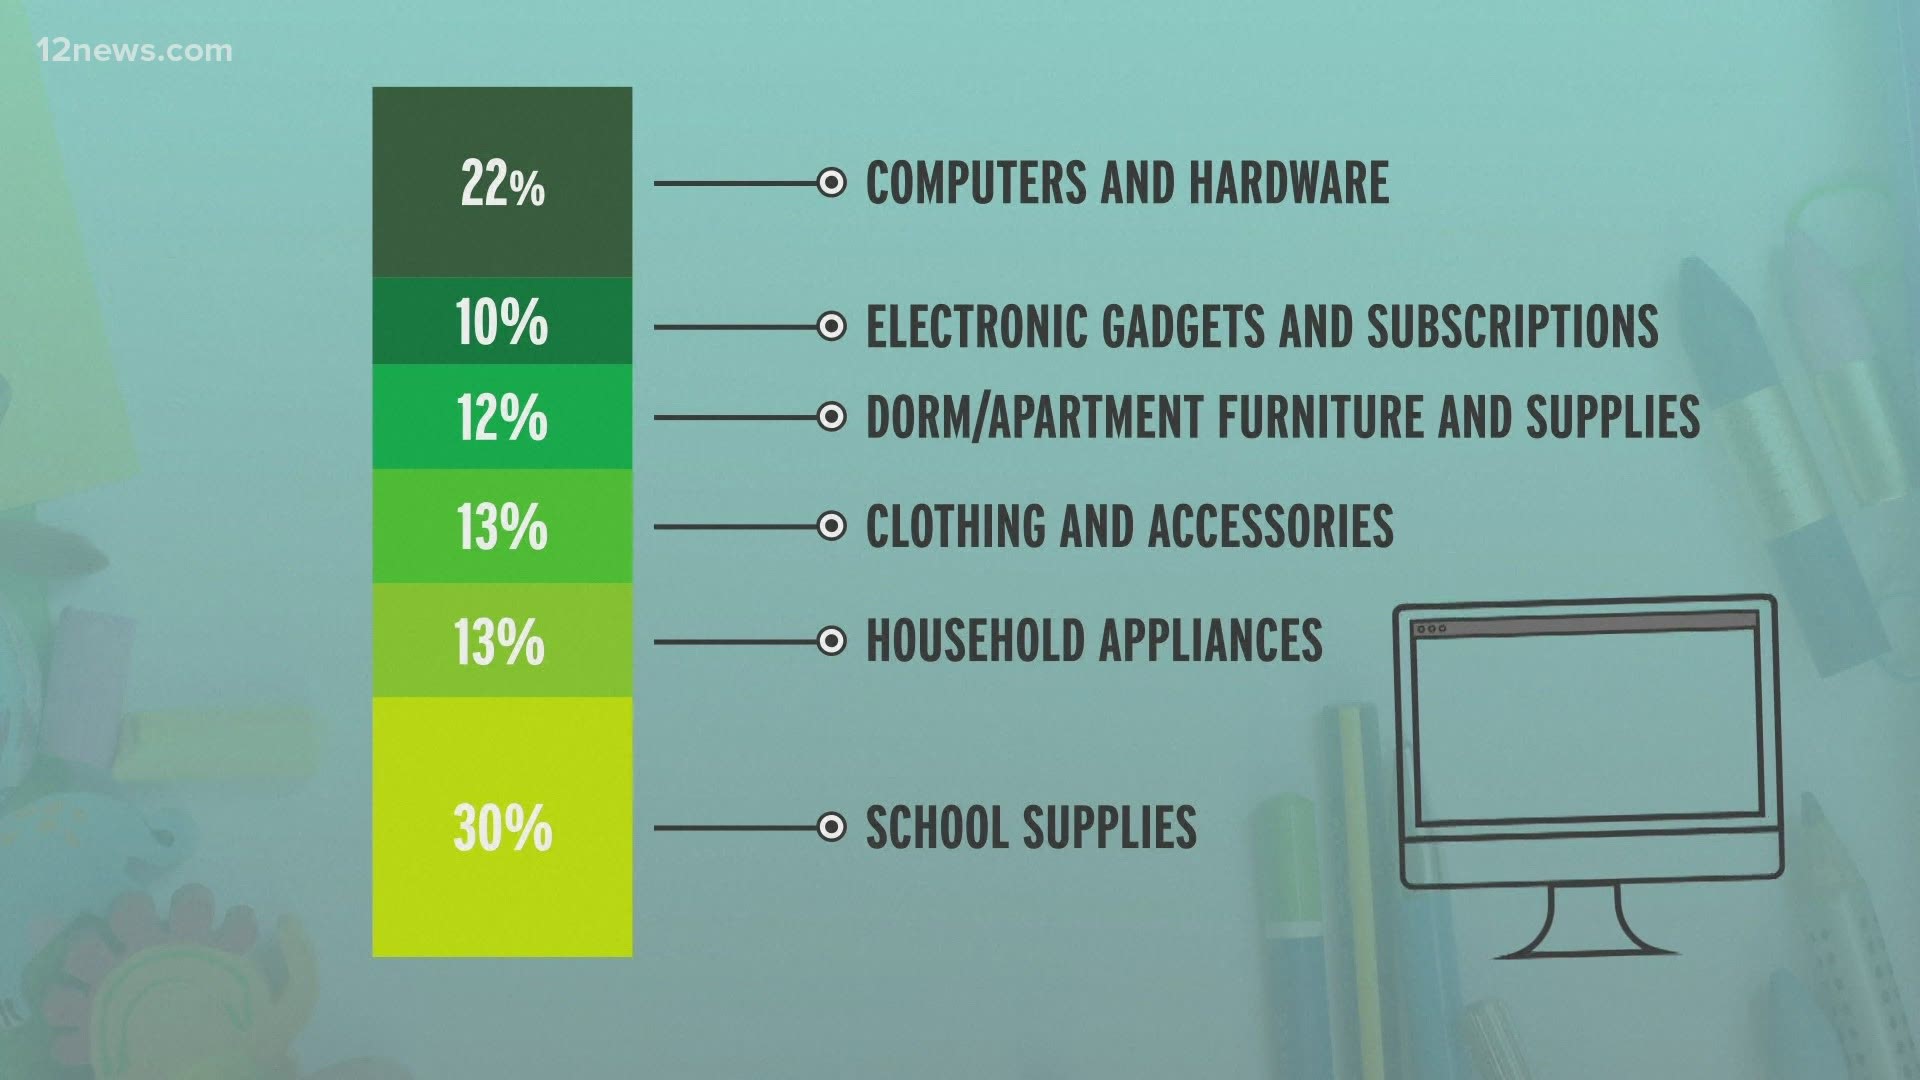 Families have begun spending more on technology than clothing for the upcoming school year.